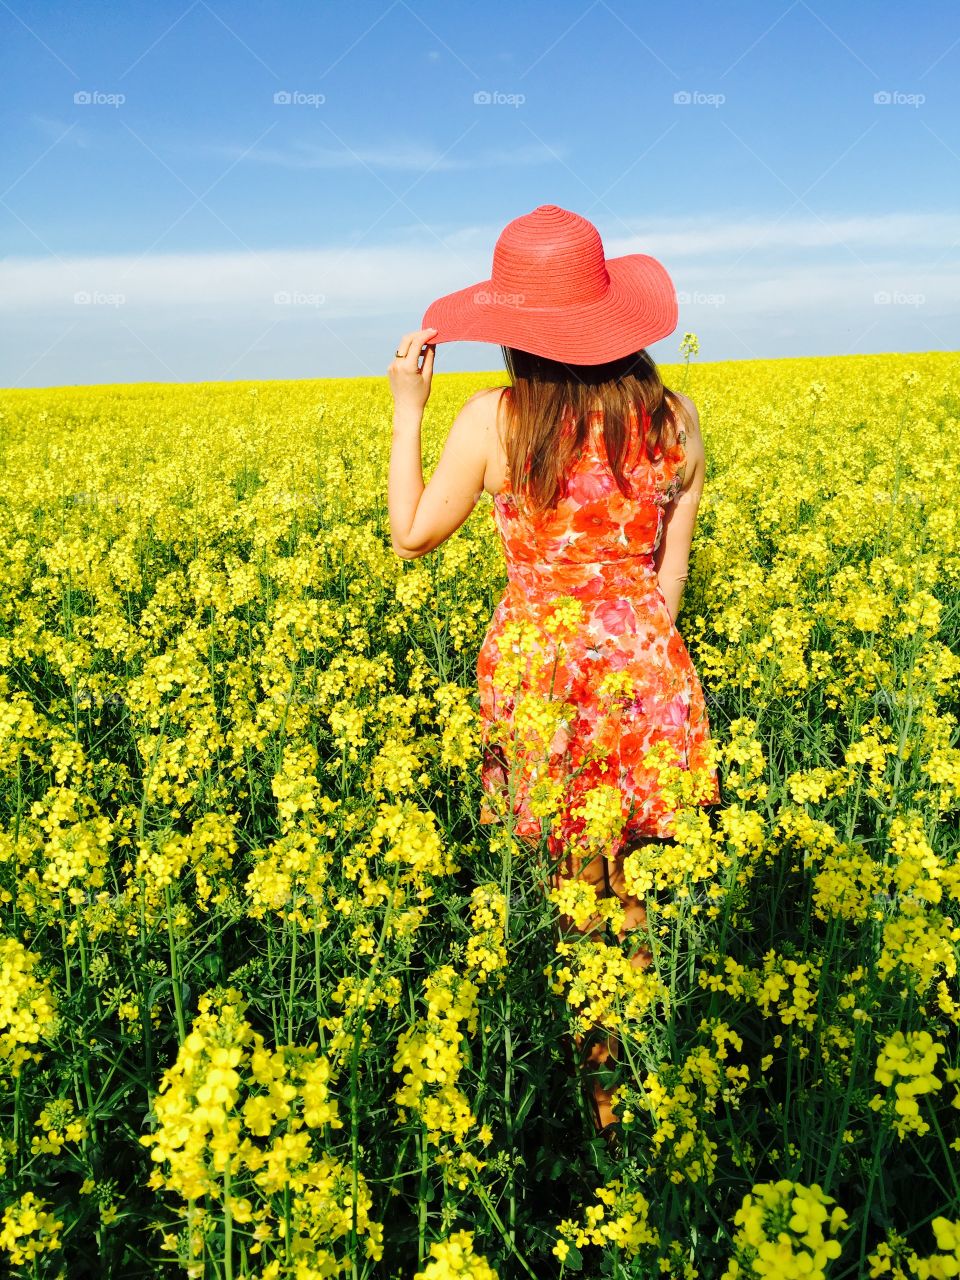 Rear view of a woman in rapeseed field